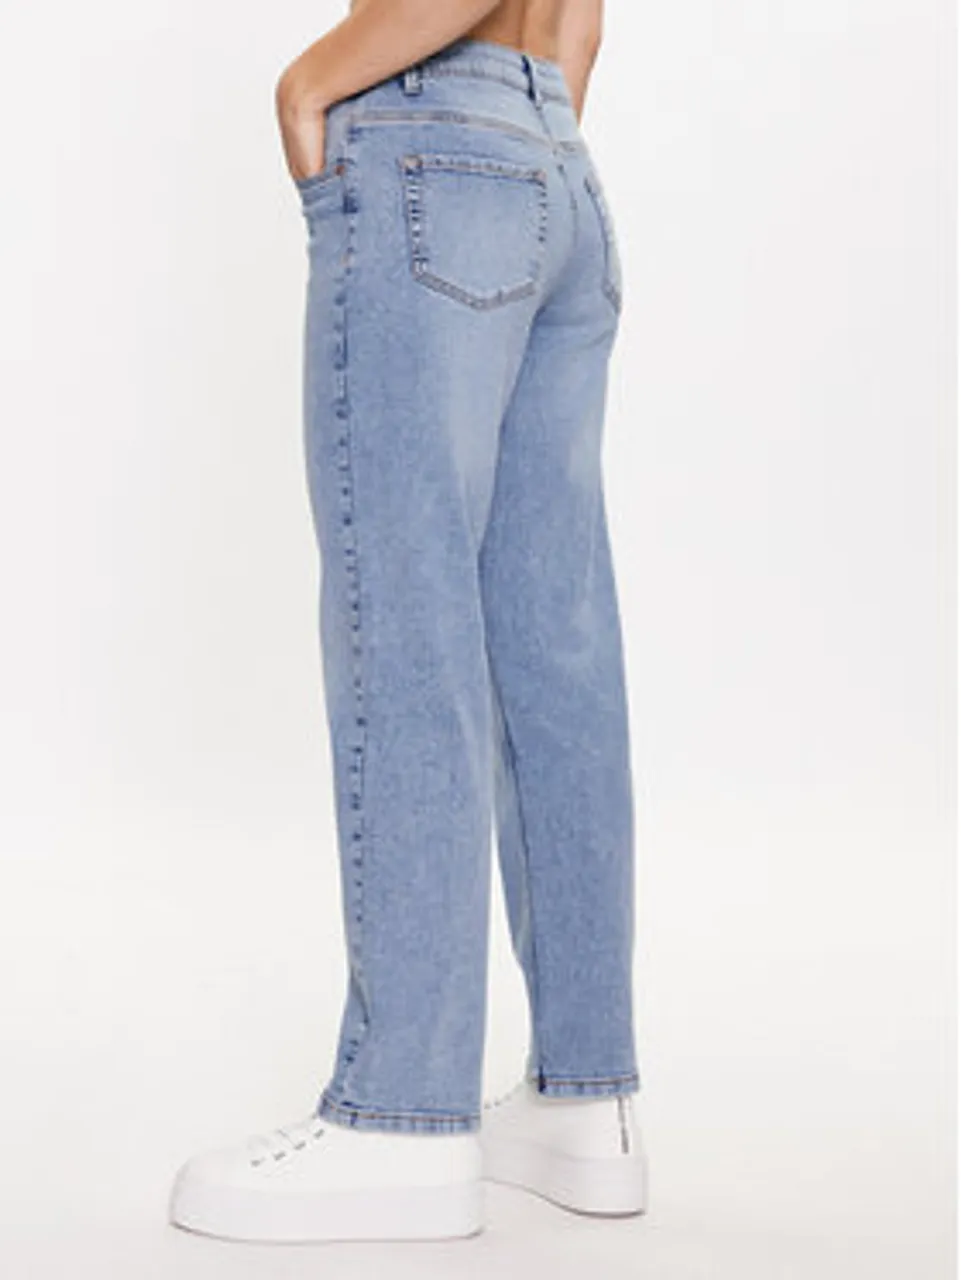 Noisy May Jeans Guthie 27027479 Blau Straight Fit